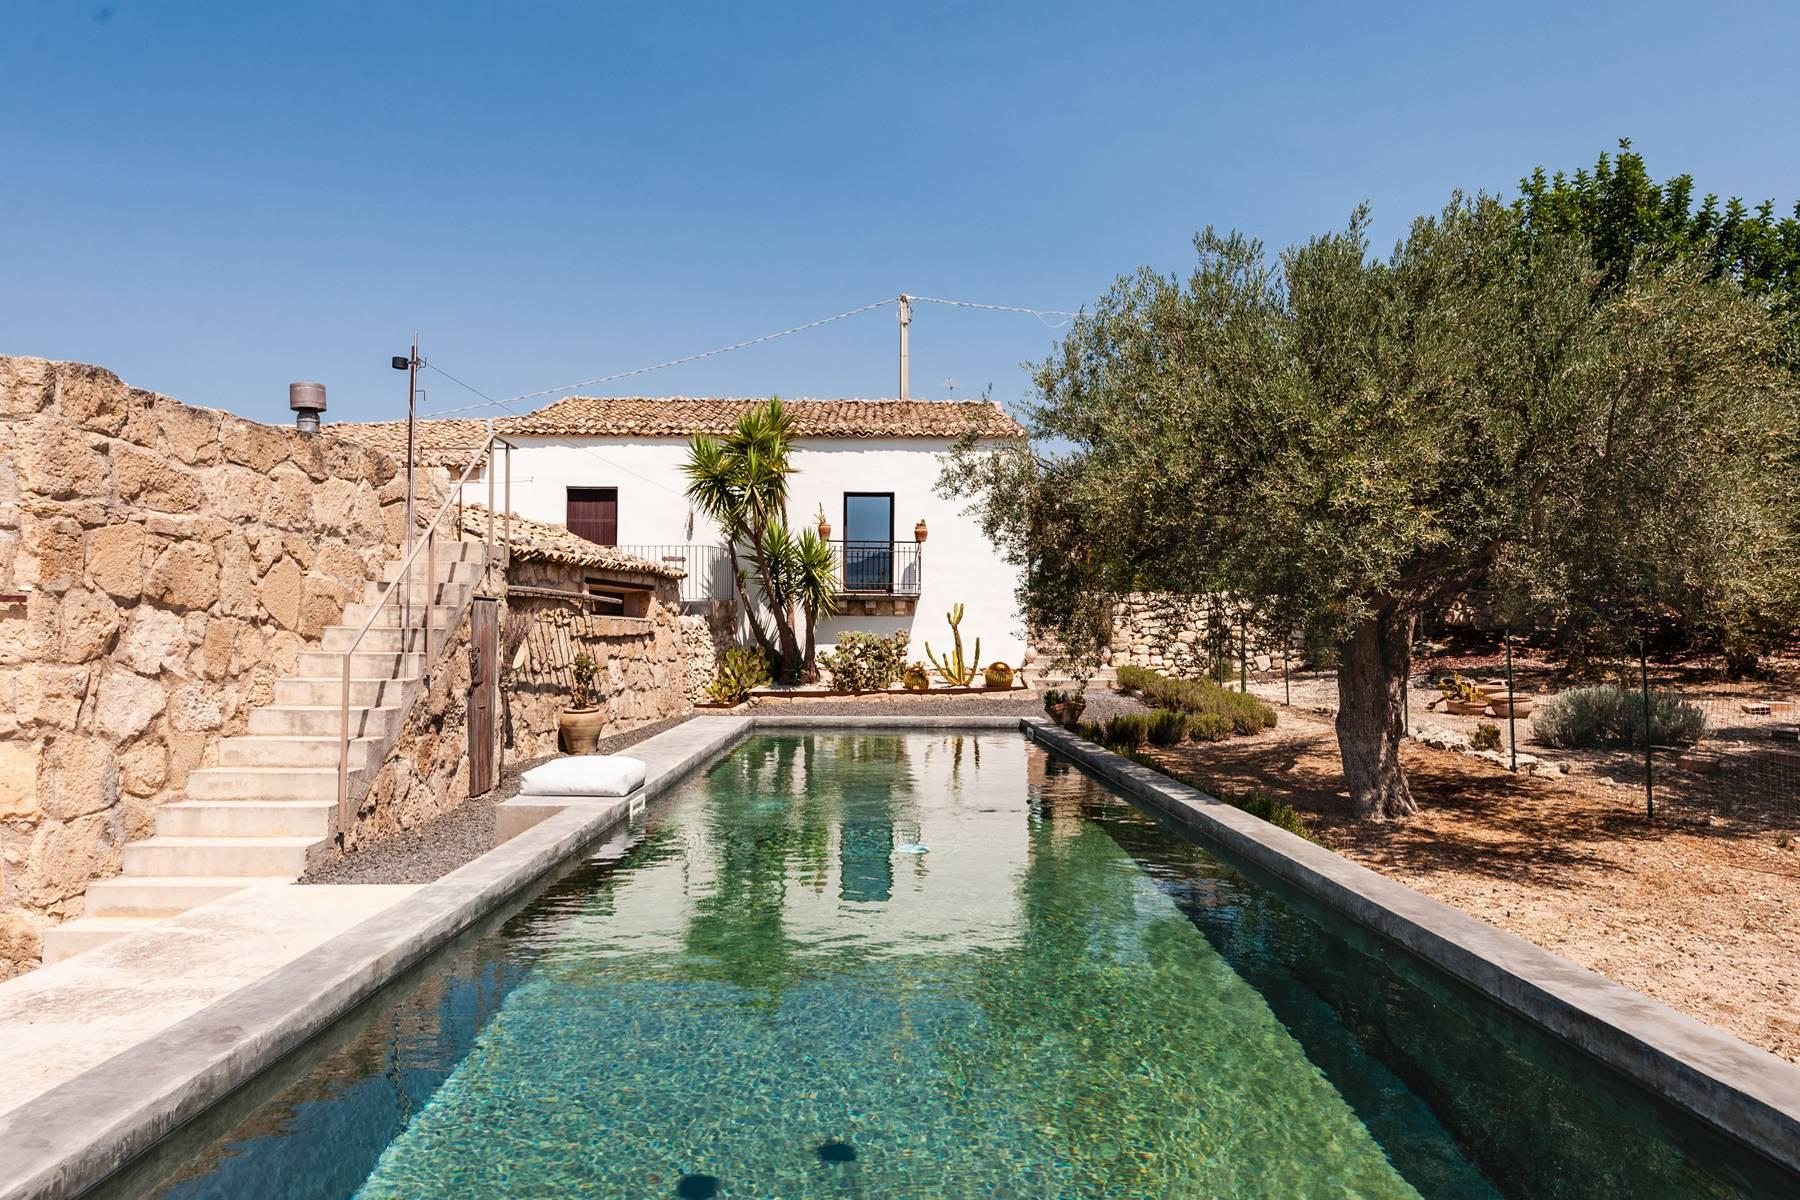 Country house with pool overlooking the Sicilian countryside - 1